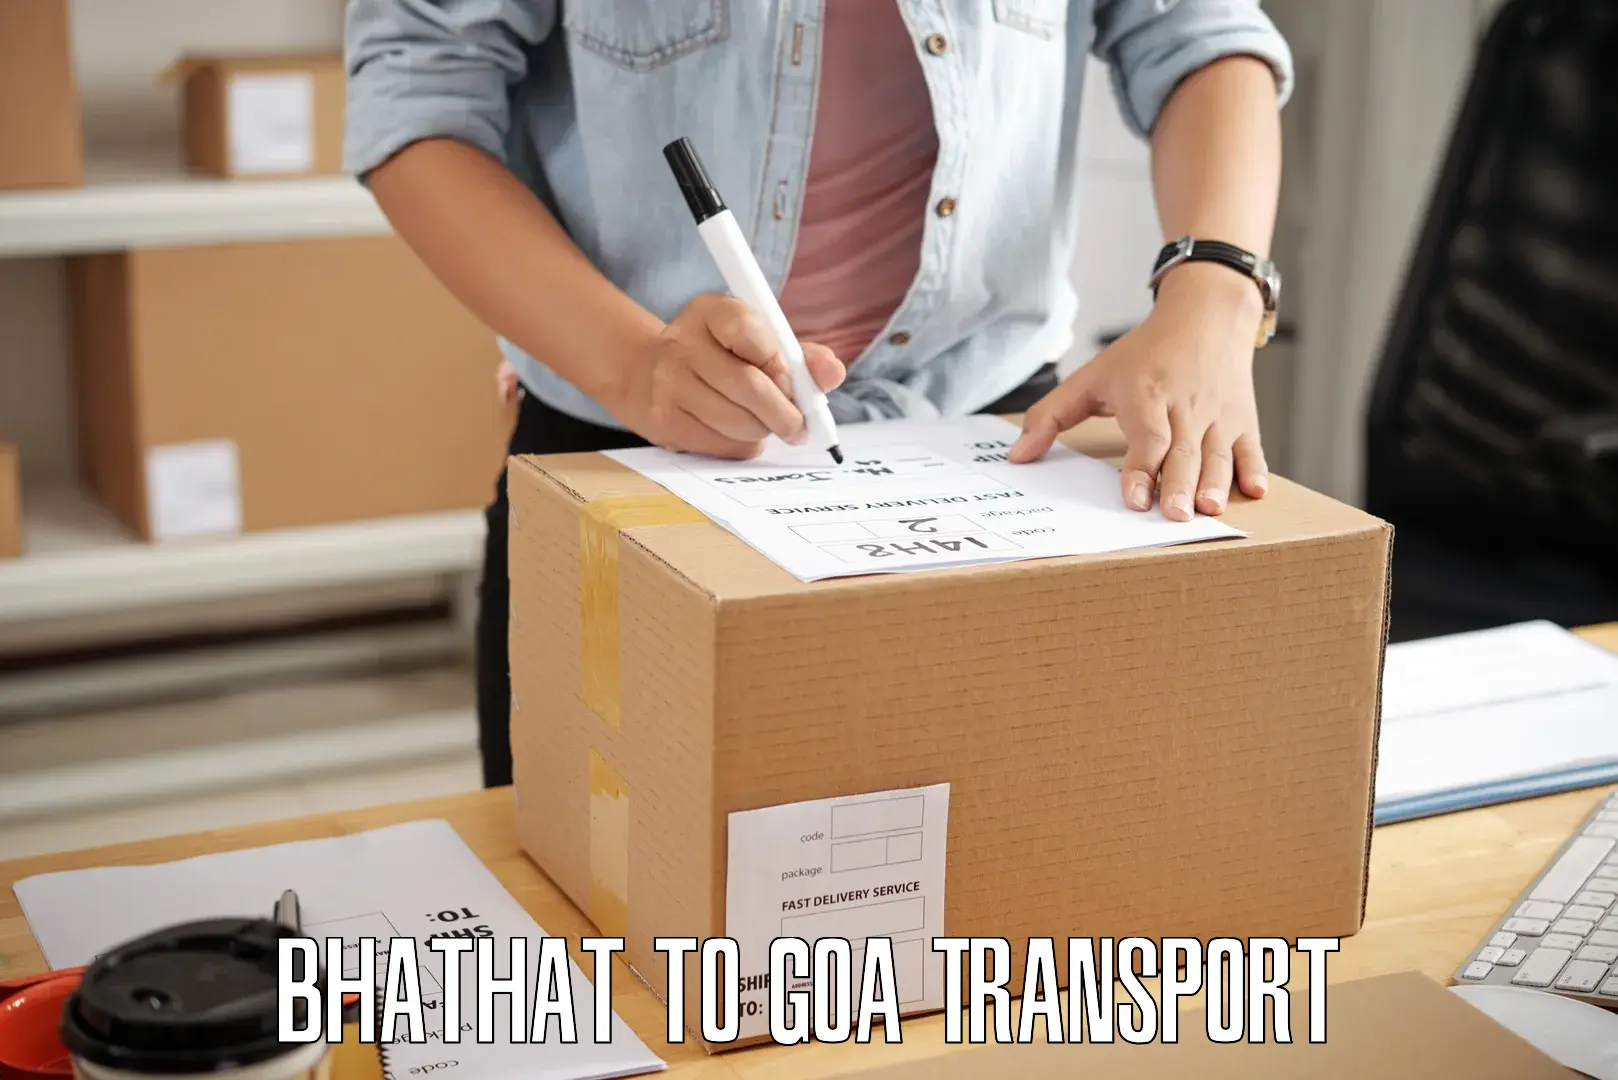 Cargo train transport services Bhathat to Panaji